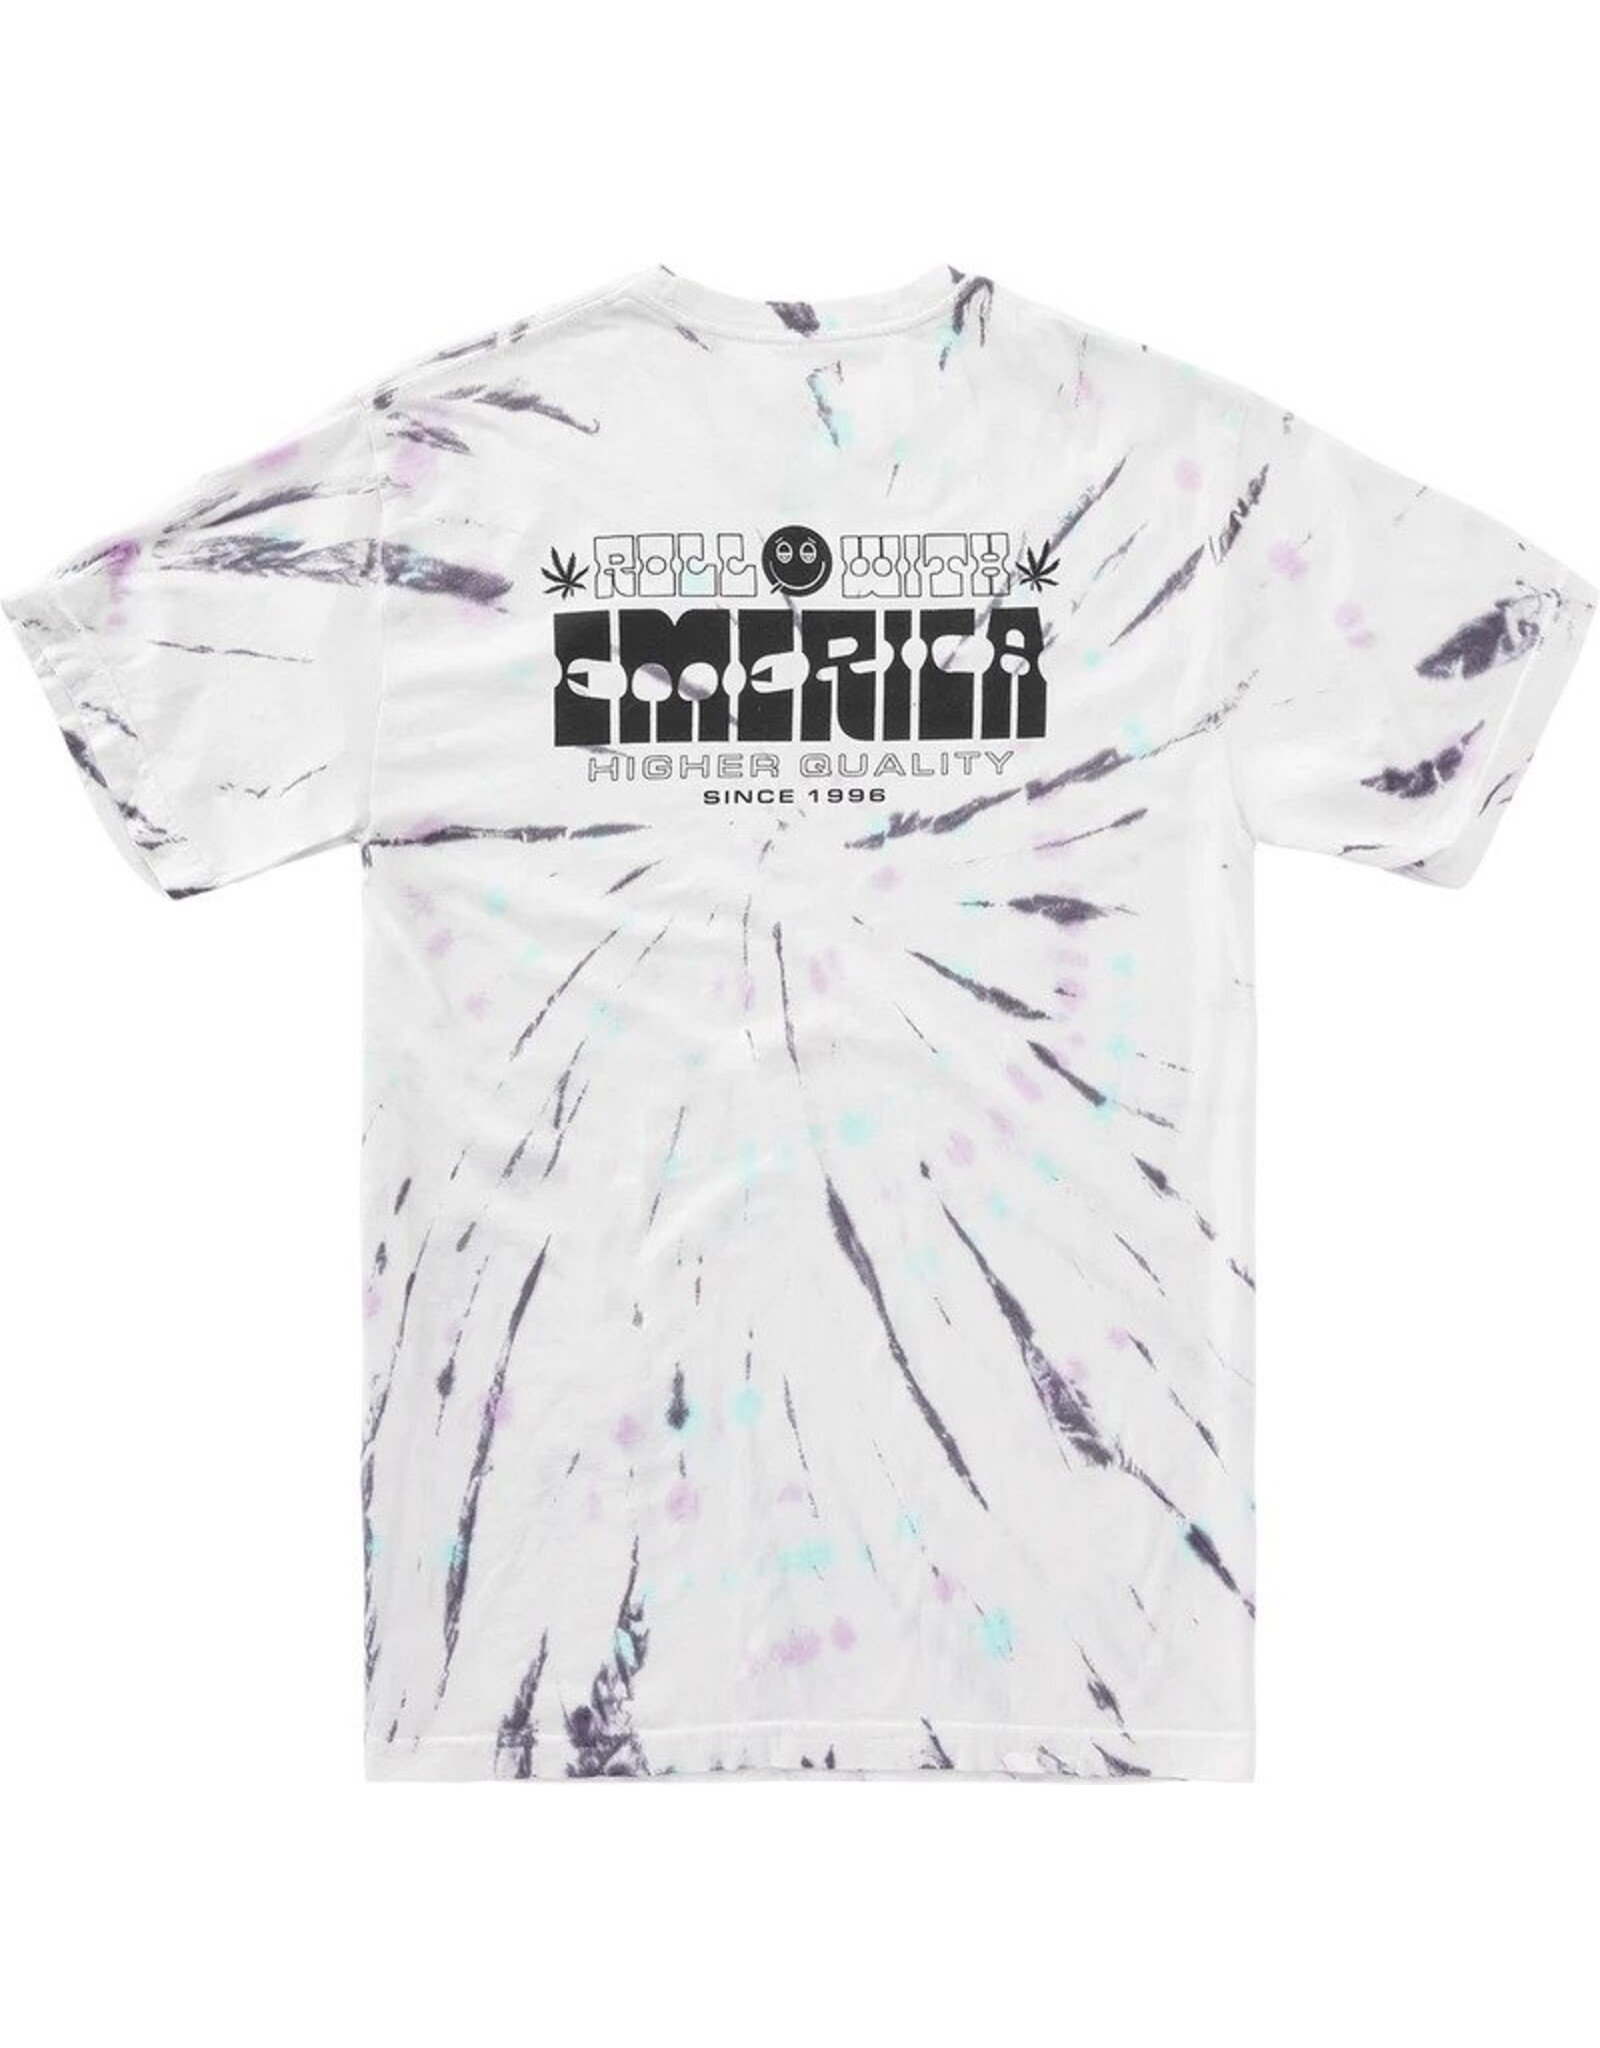 Emerica Roll with the Tiedye